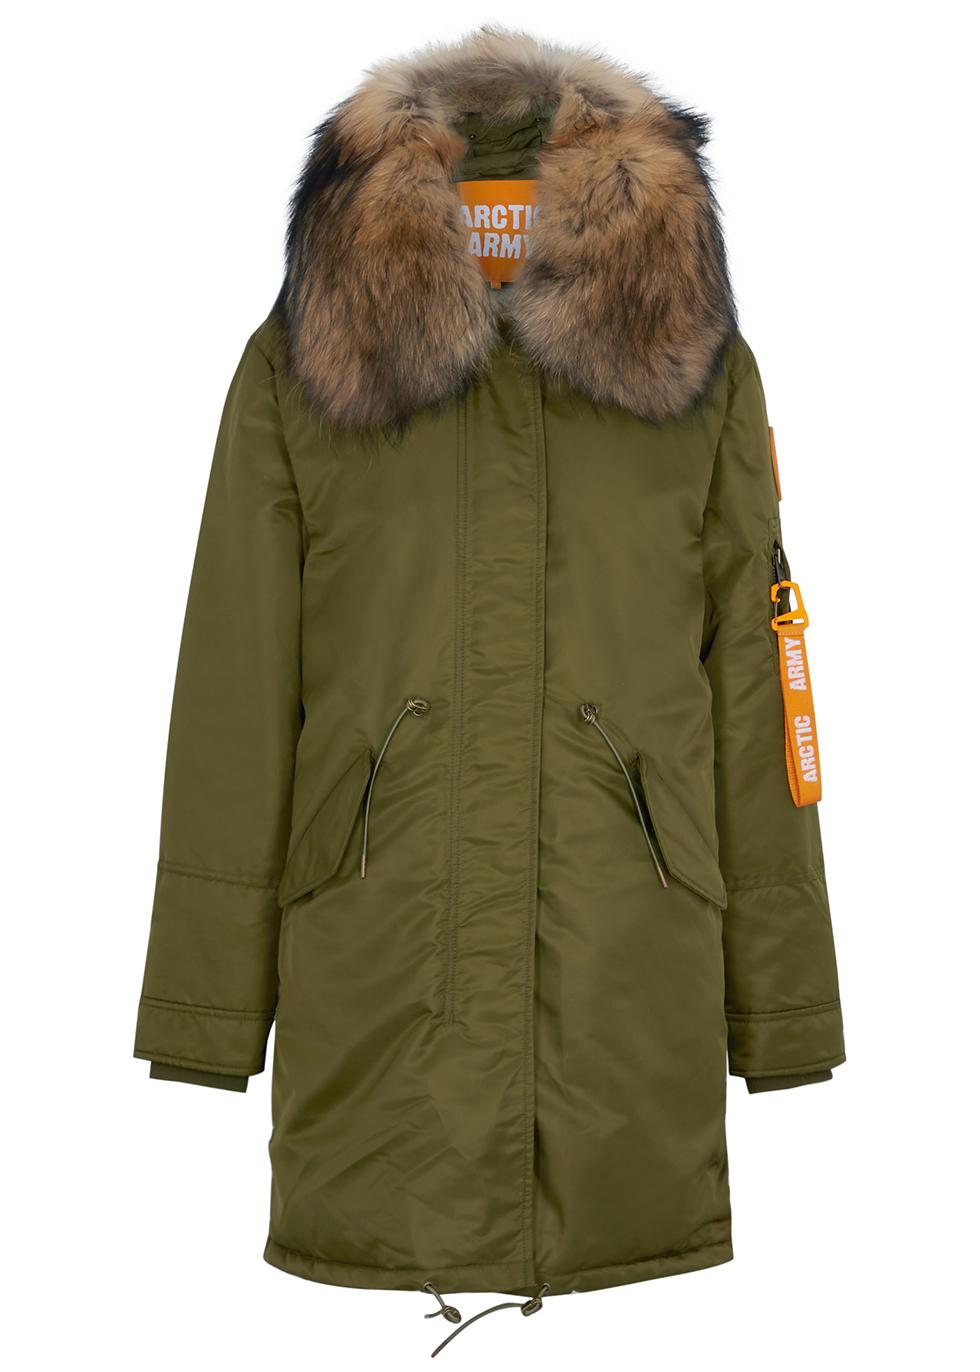 Army green fur-trimmed padded shell parka by ARCTIC ARMY